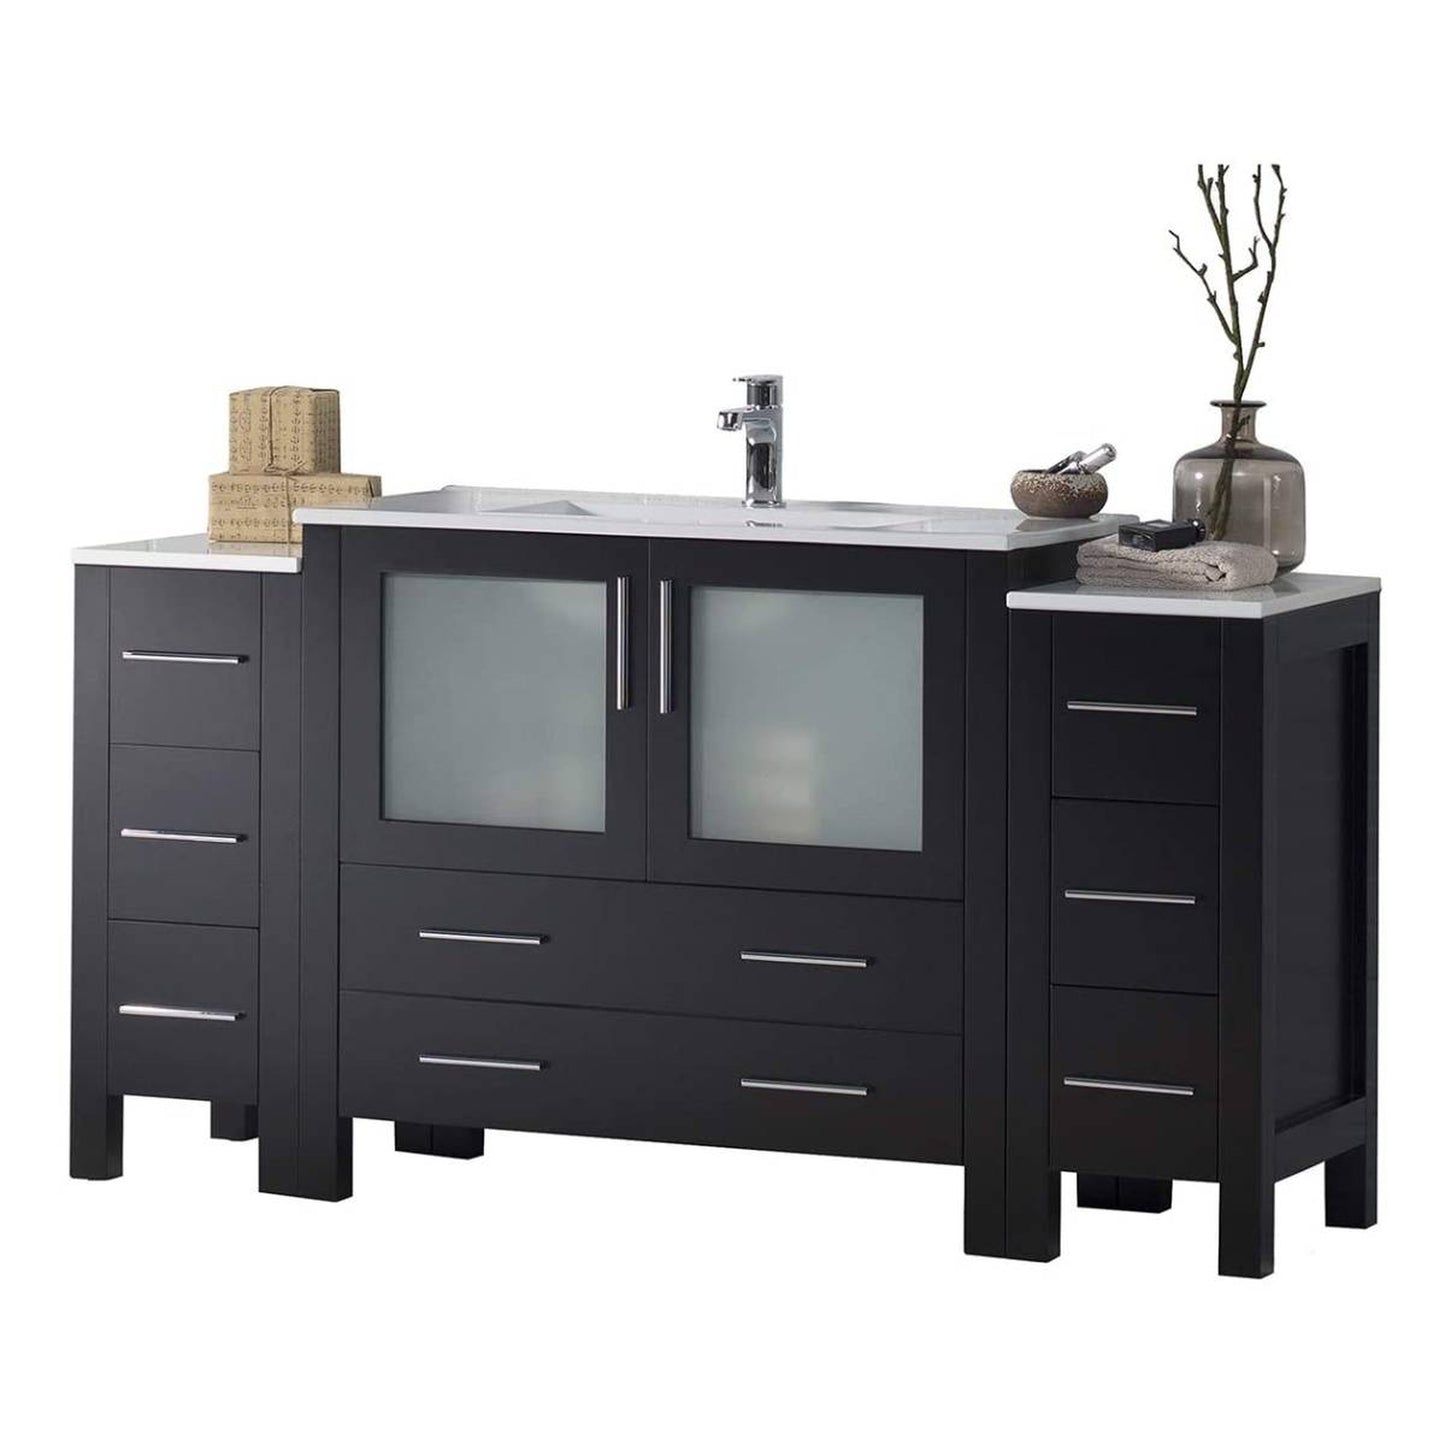 Blossom Sydney 60" Espresso Freestanding Vanity Set With Integrated Double Sink Ceramic Top and Two Side Cabinet